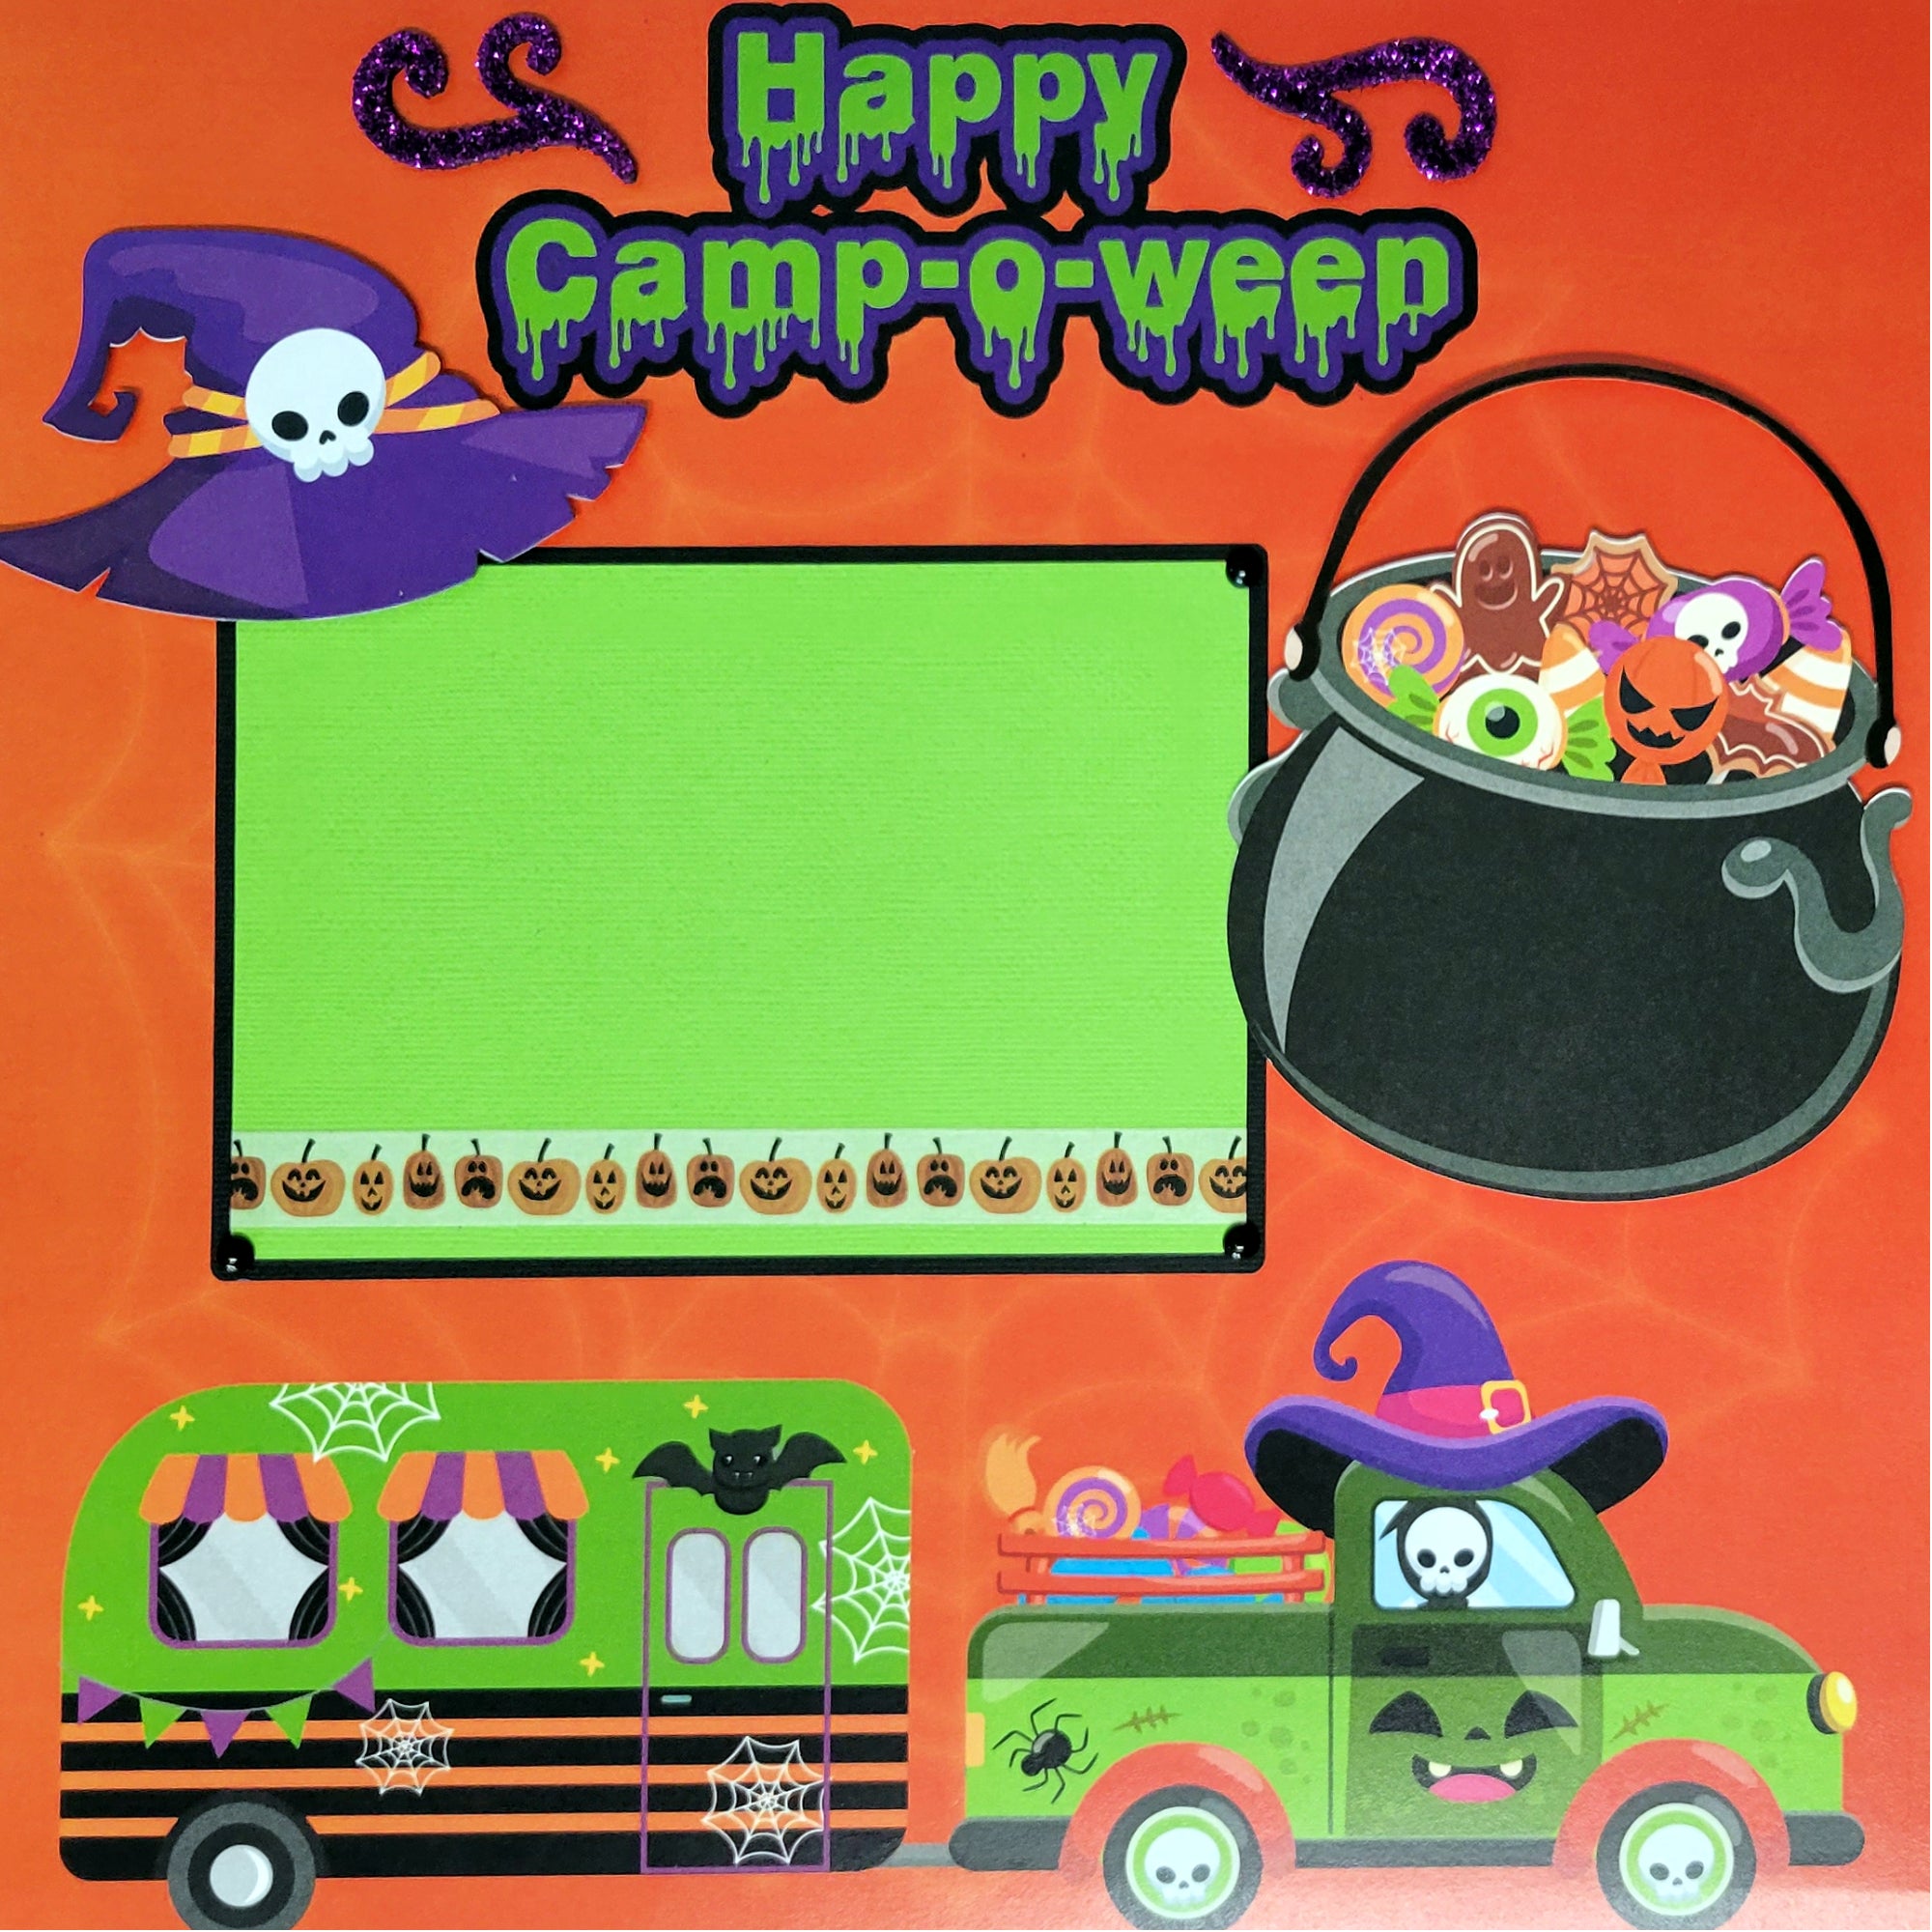 Happy Camp-o-ween (2) - 12 x 12 Pages, Fully-Assembled & Hand-Crafted 3D Scrapbook Premade by SSC Designs